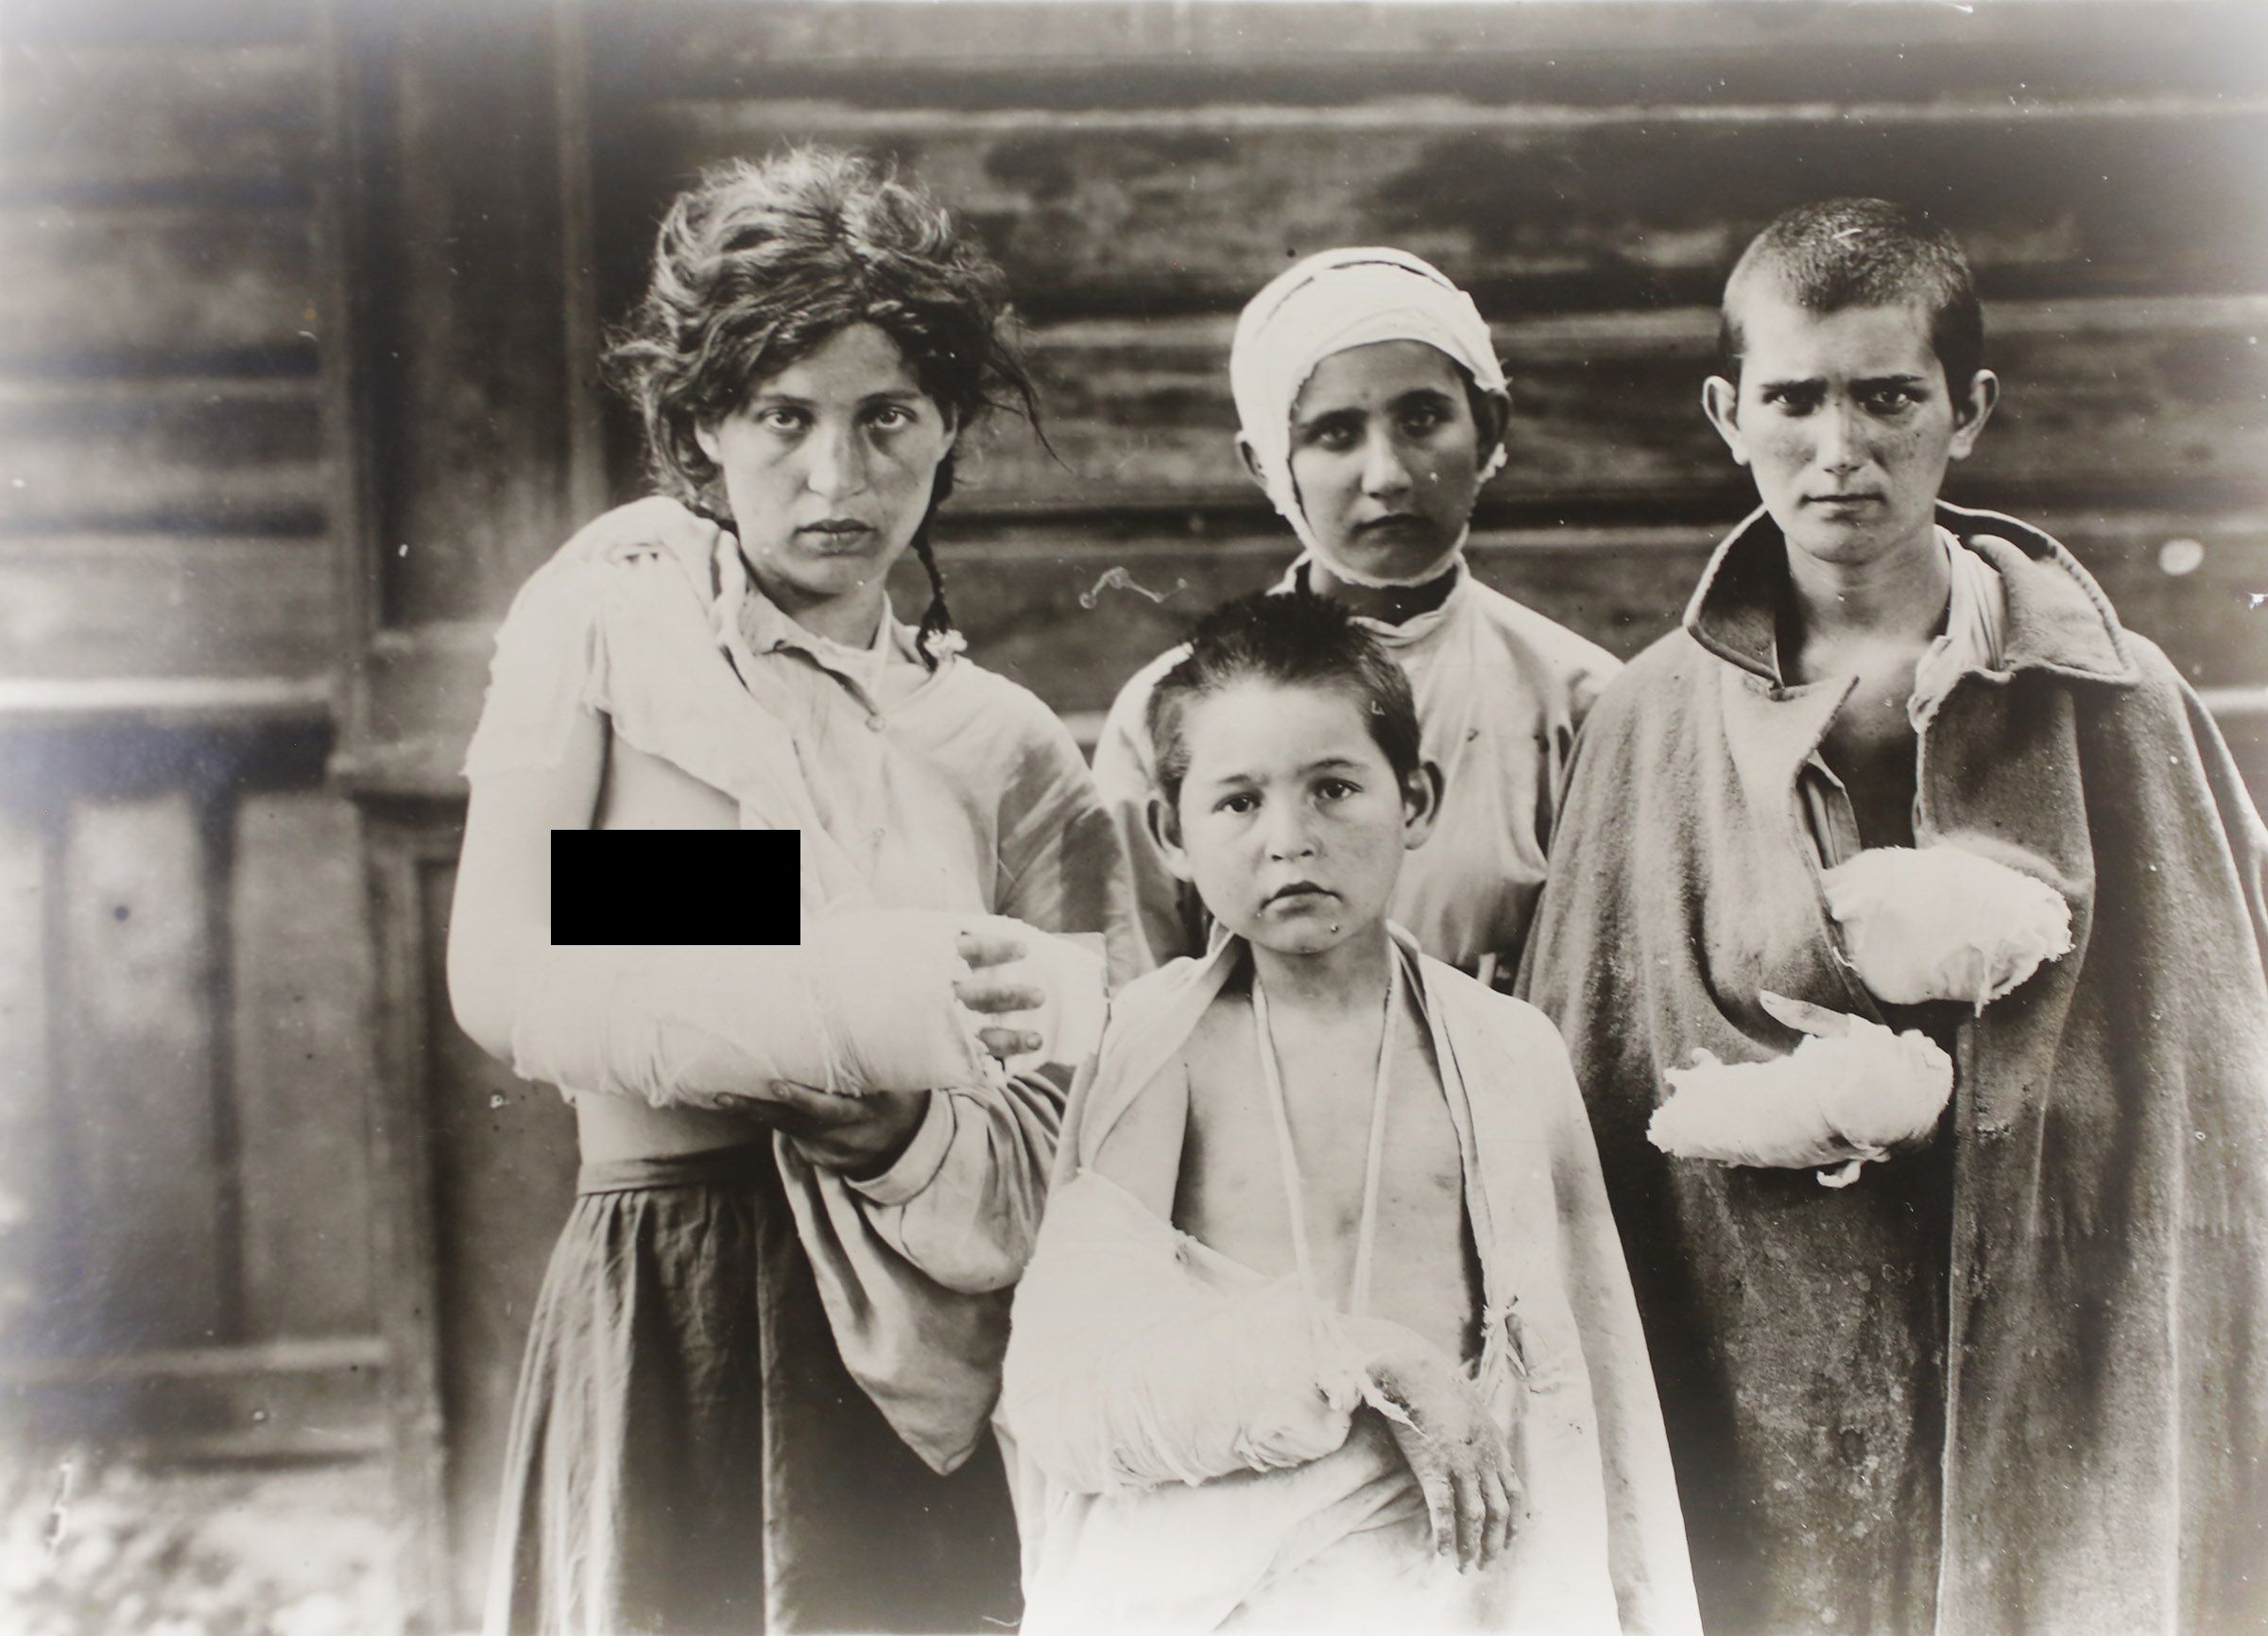 Survivors of a Pogrom (an organized massacre of a particular ethnic group, in particular that of Jews in Russia or eastern Europe) in Ukraine in 1920.